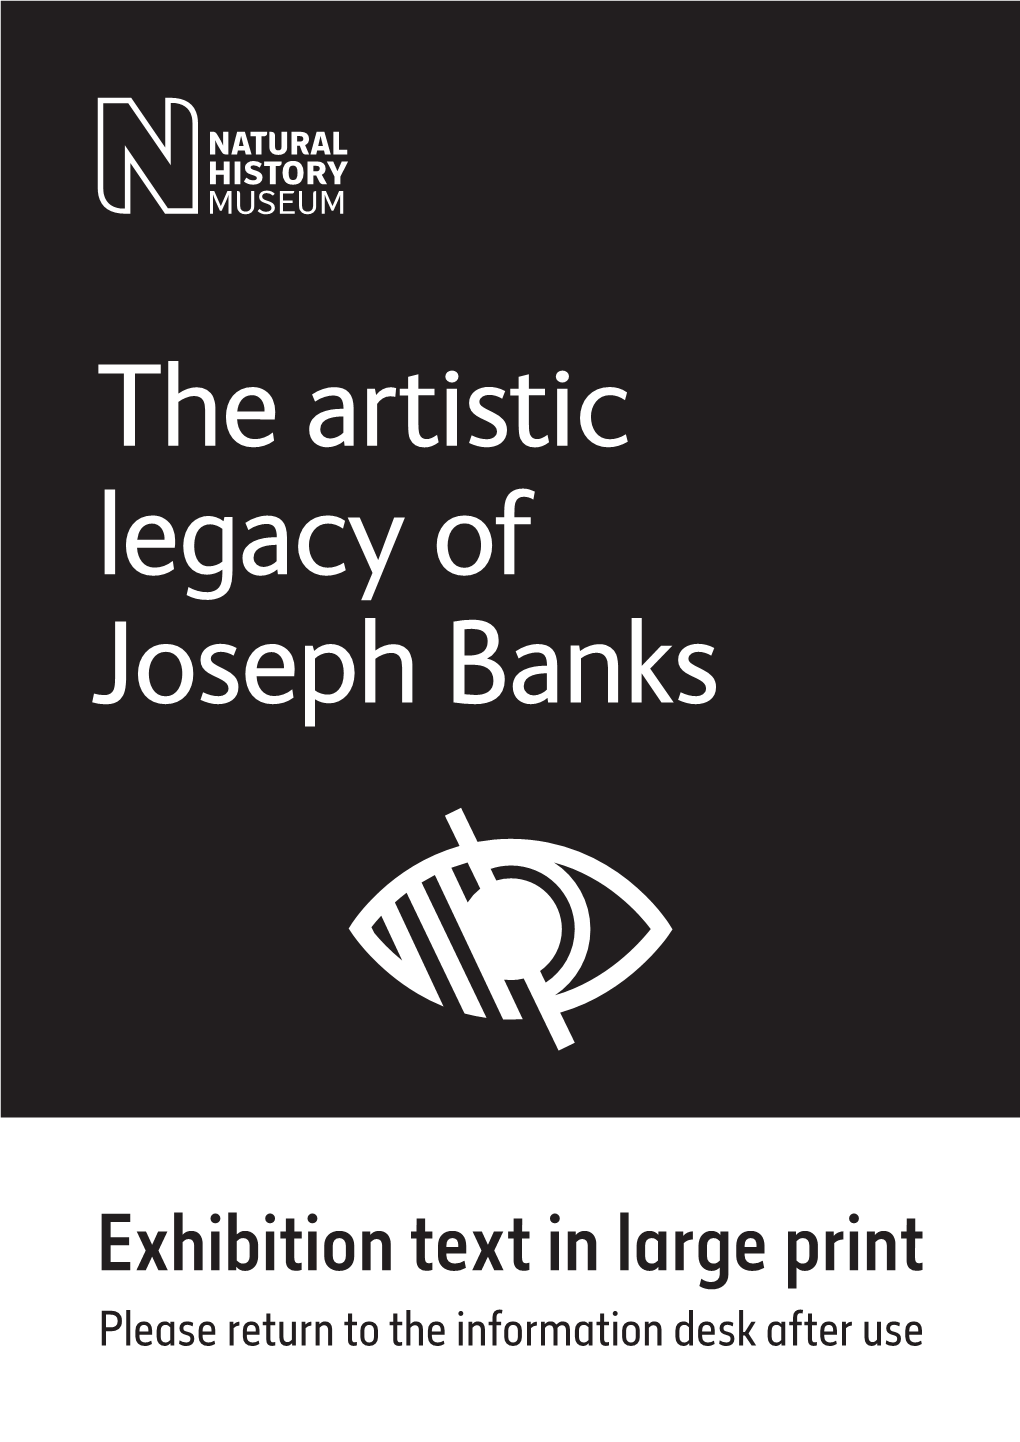 The Artistic Legacy of Joseph Banks Large-Print Guide Rotation